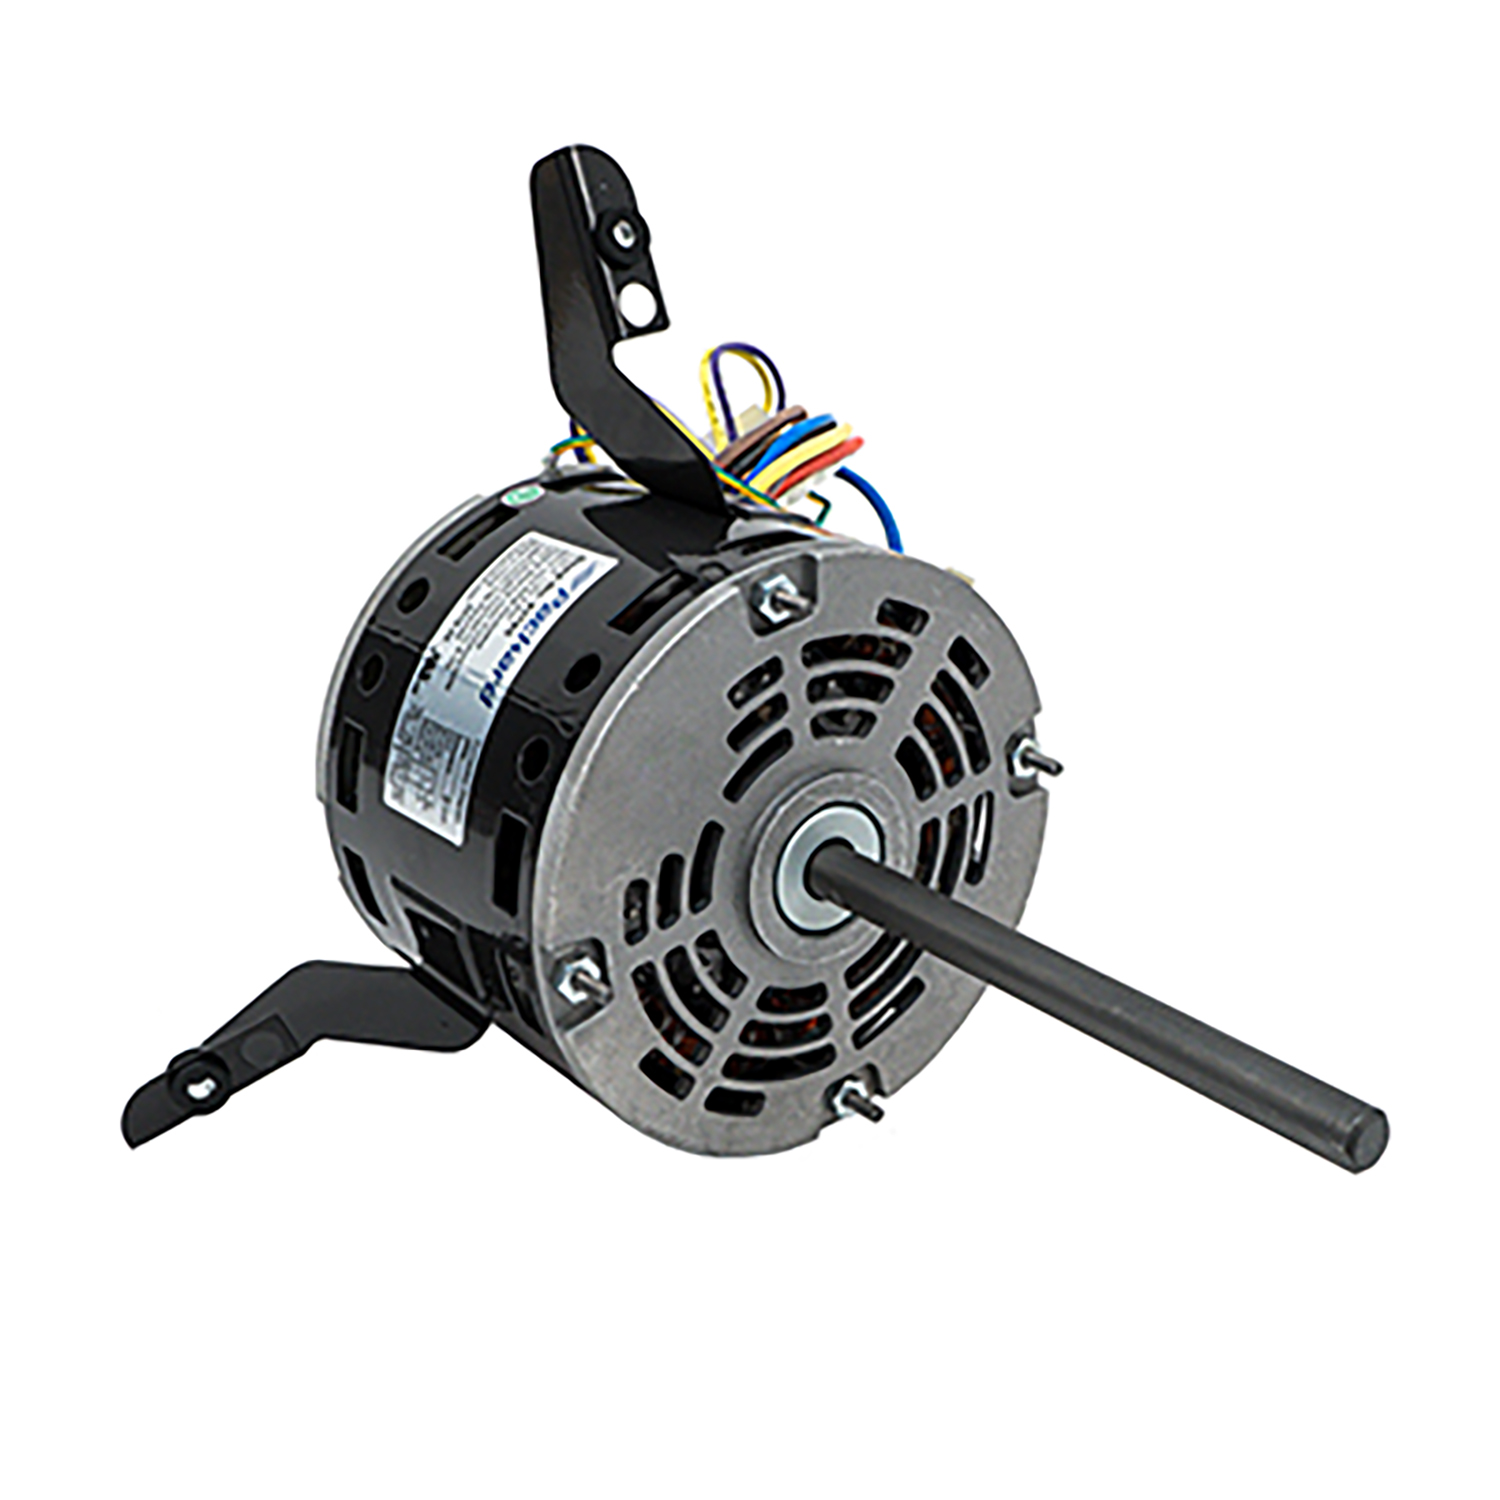 48 Frame Direct Drive Blower Motor, 1/6 HP, 115 Volts, 1075 RPM, 3 Speed